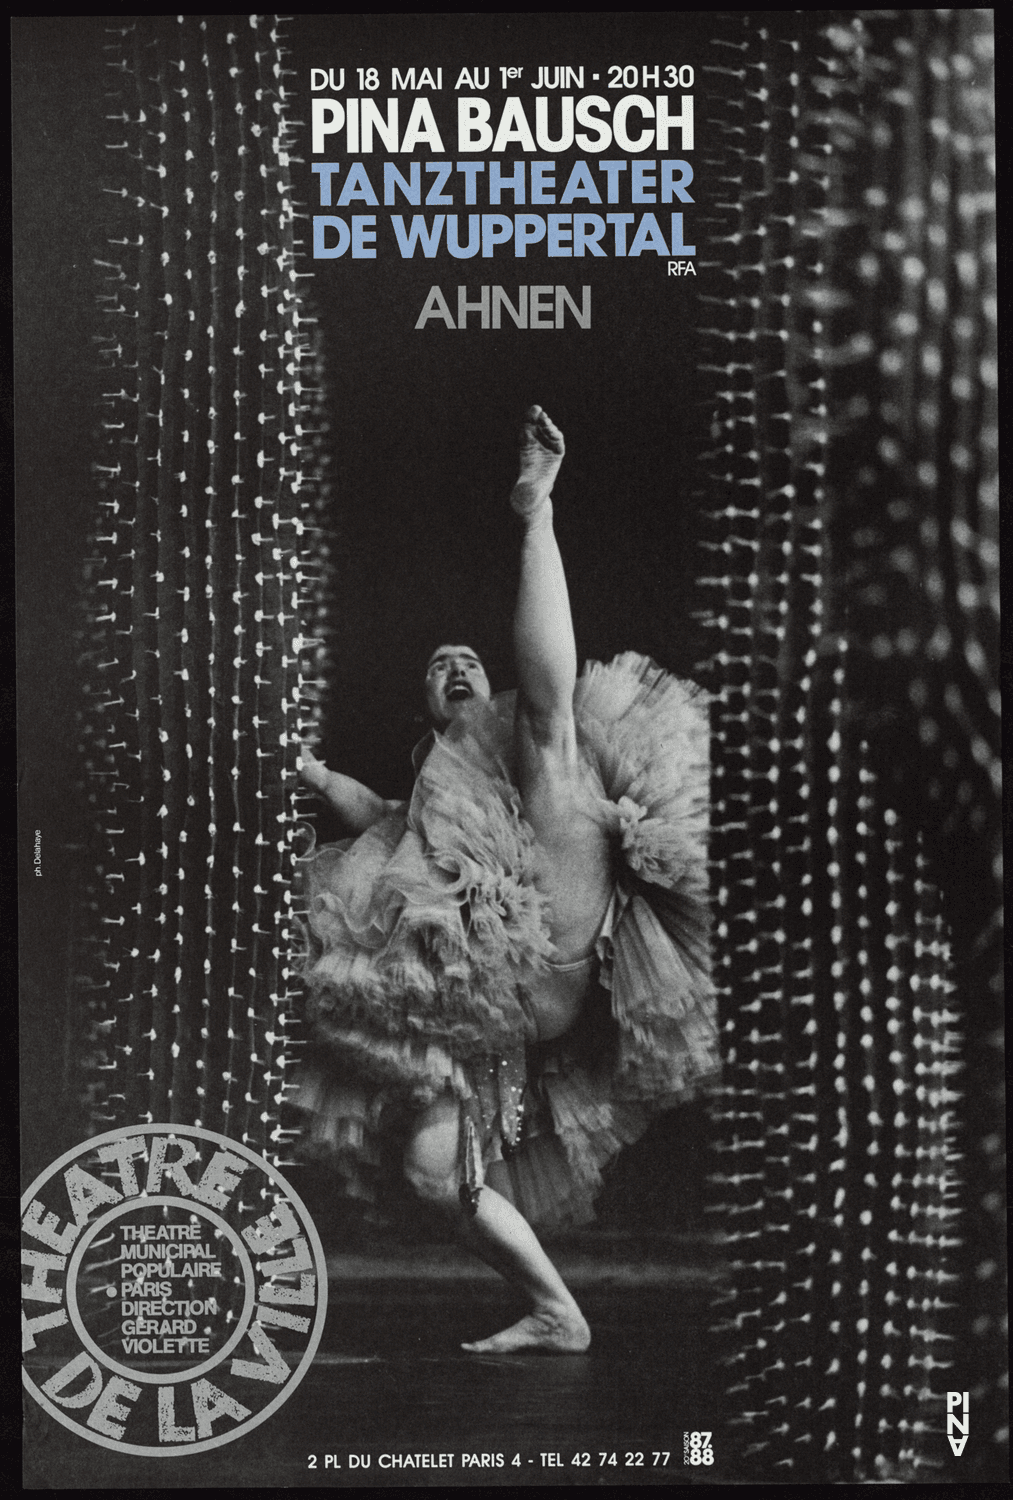 Poster for “Ahnen” by Pina Bausch in Paris, 05/18/1988 – 06/01/1988